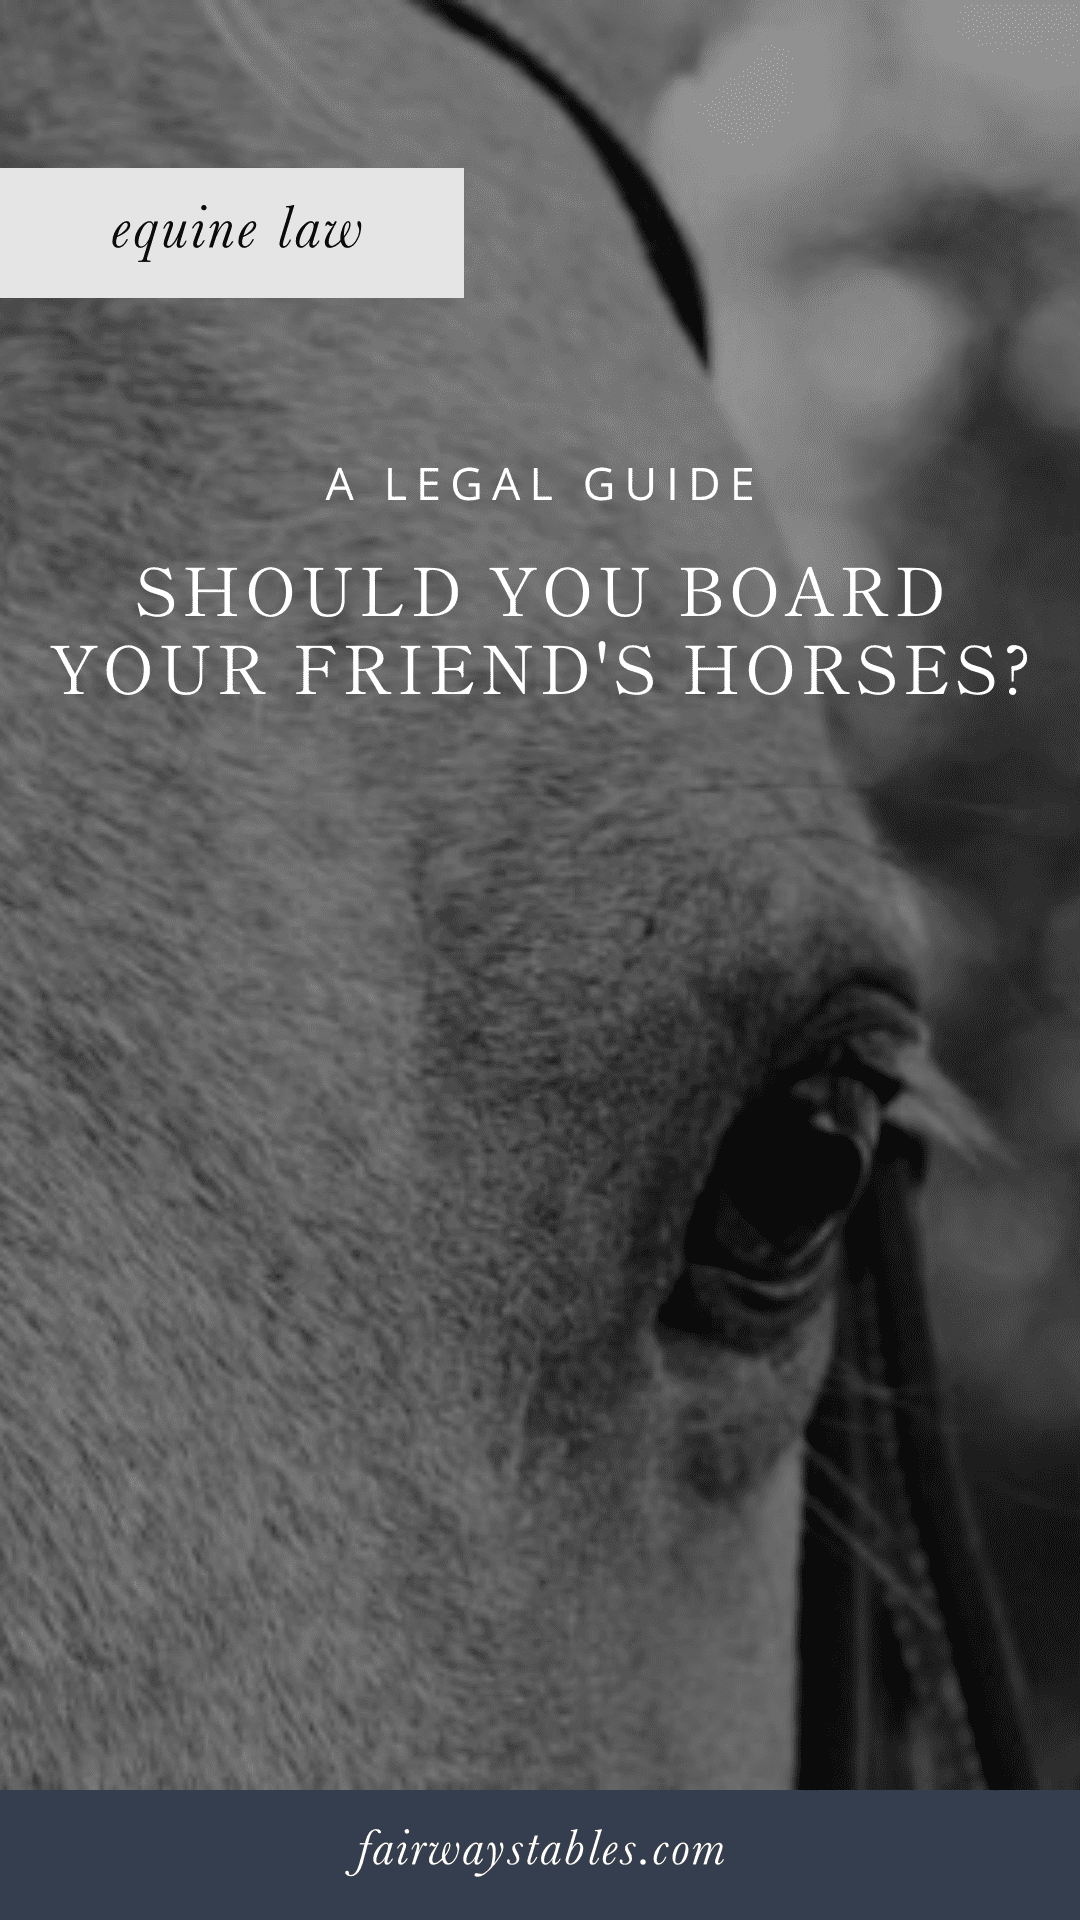 boarding your friends horses legally